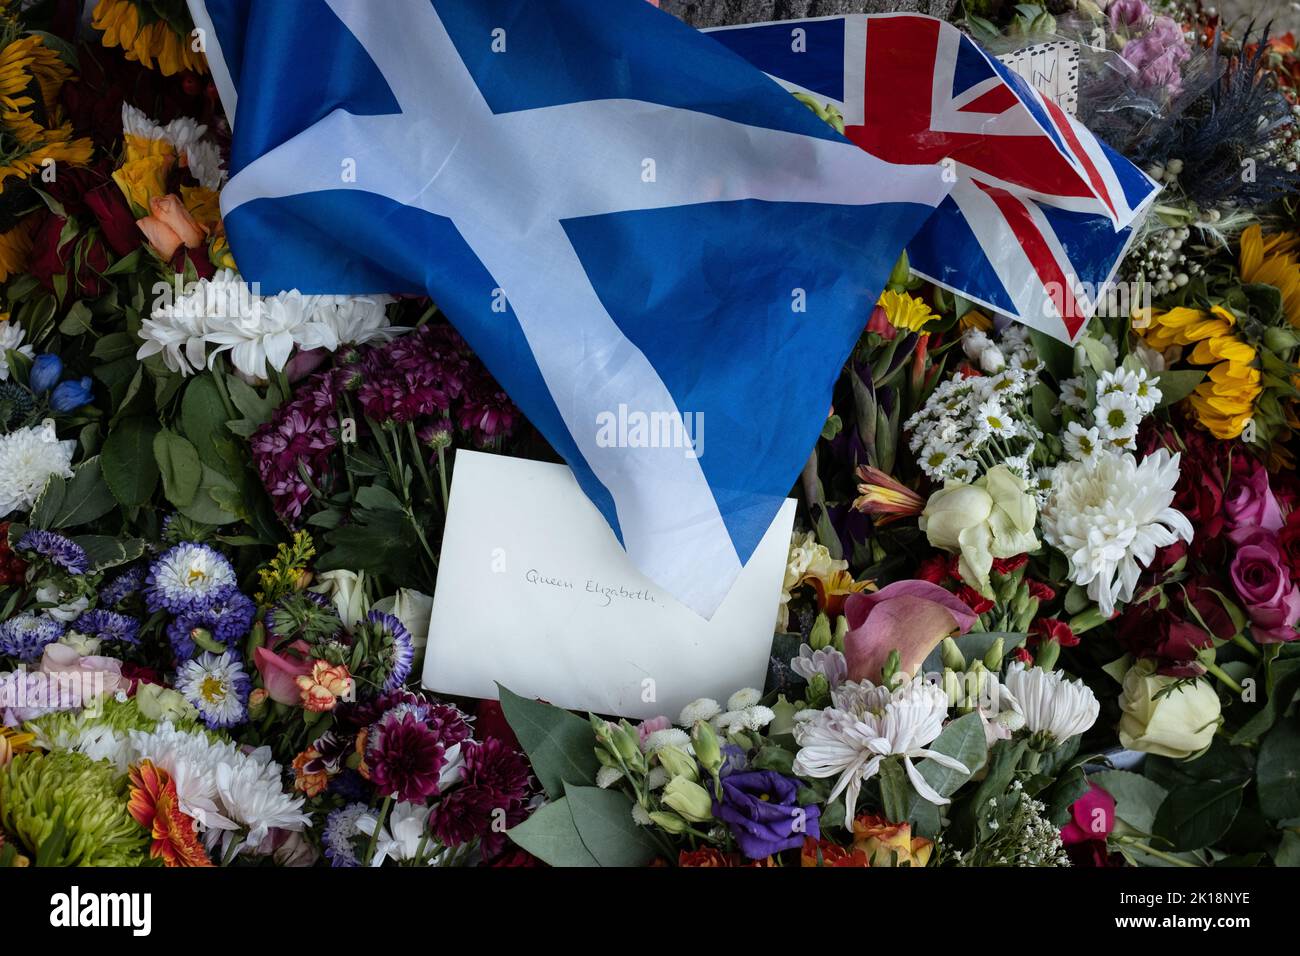 Flowers, flags and letters left in the gardens of Palace of Holyroodhouse as a mark of respect to Her Majesty Queen Elizabeth II, who has died aged 96yrs, in Edinburgh, Scotland, 13 September 2022. Stock Photo